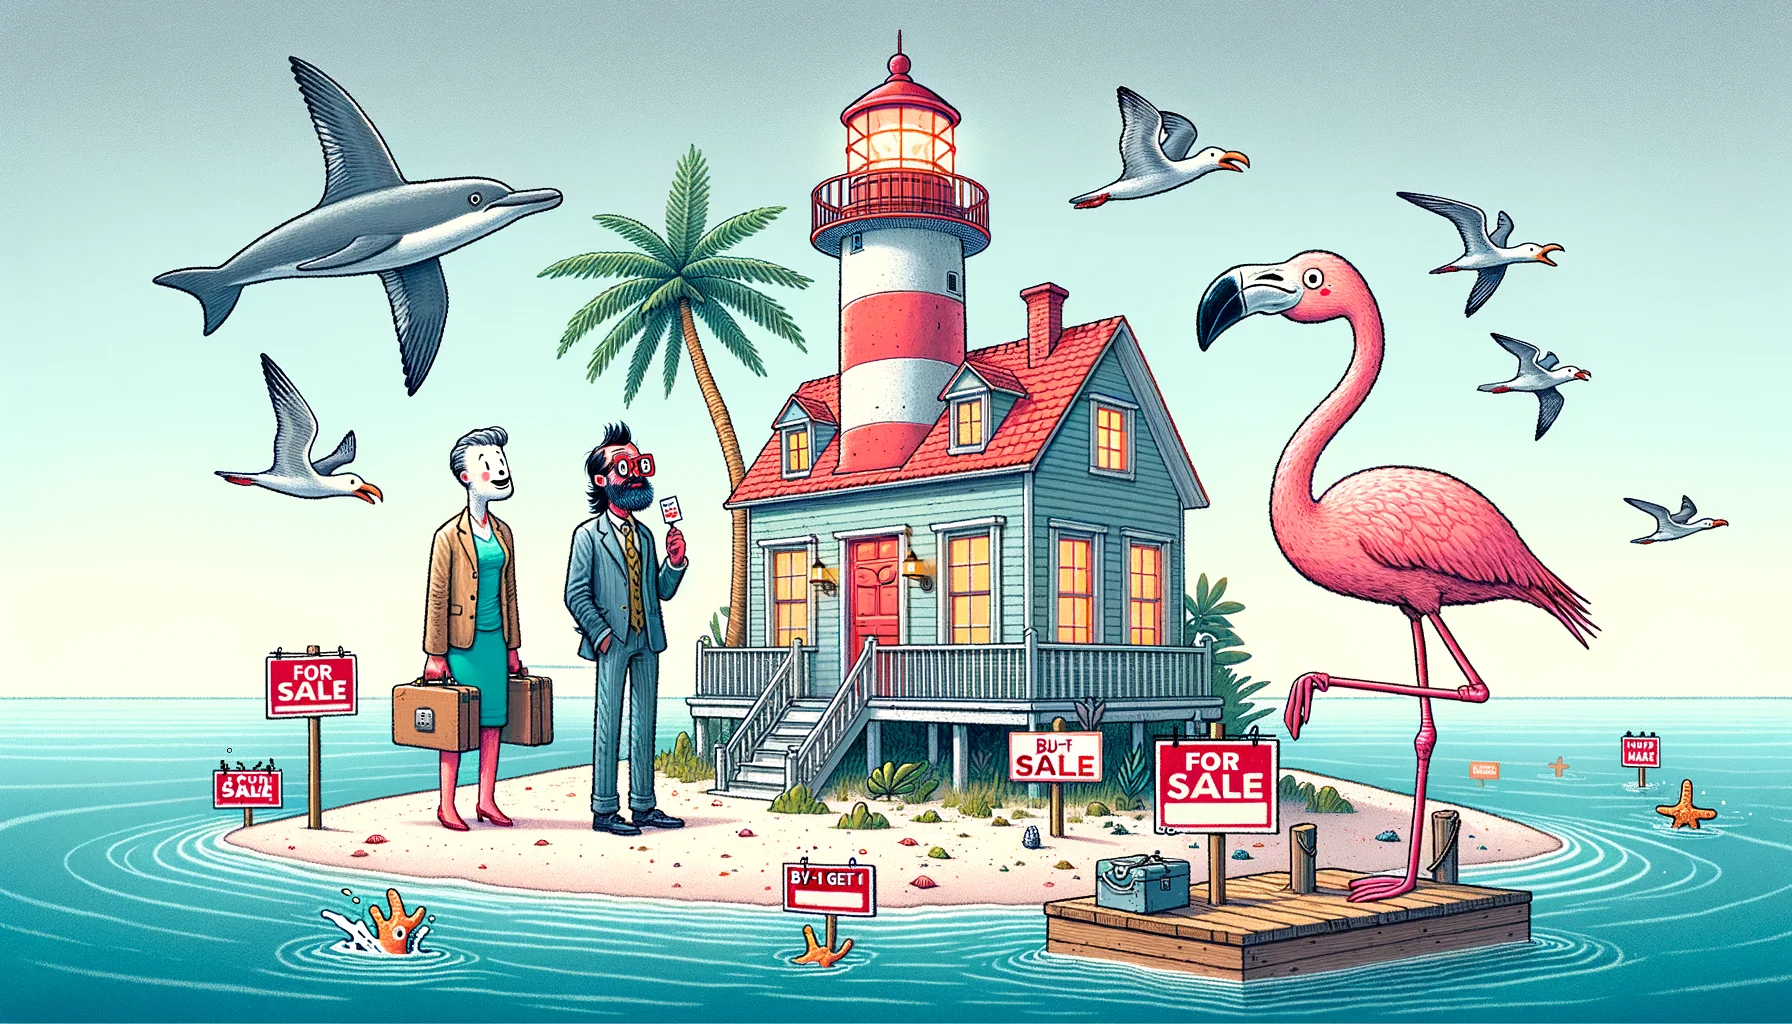 Illustrate a whimsical and humorous scenario of three people from different descents, a White man, a Hispanic woman, and a South Asian man, attempting to buy their second home. This home is not ordinary, but a lighthouse on a tiny island with a single palm tree. The real estate agent is a flamingo standing on one leg, wearing glasses, and holding a sign that reads 'For Sale'. Surround the scene with buy-1-get-1 seagulls flying overhead, a dolphin jumping out of the water with a 'sale' sign in its mouth, and create a general ambiance of comic hilarity.